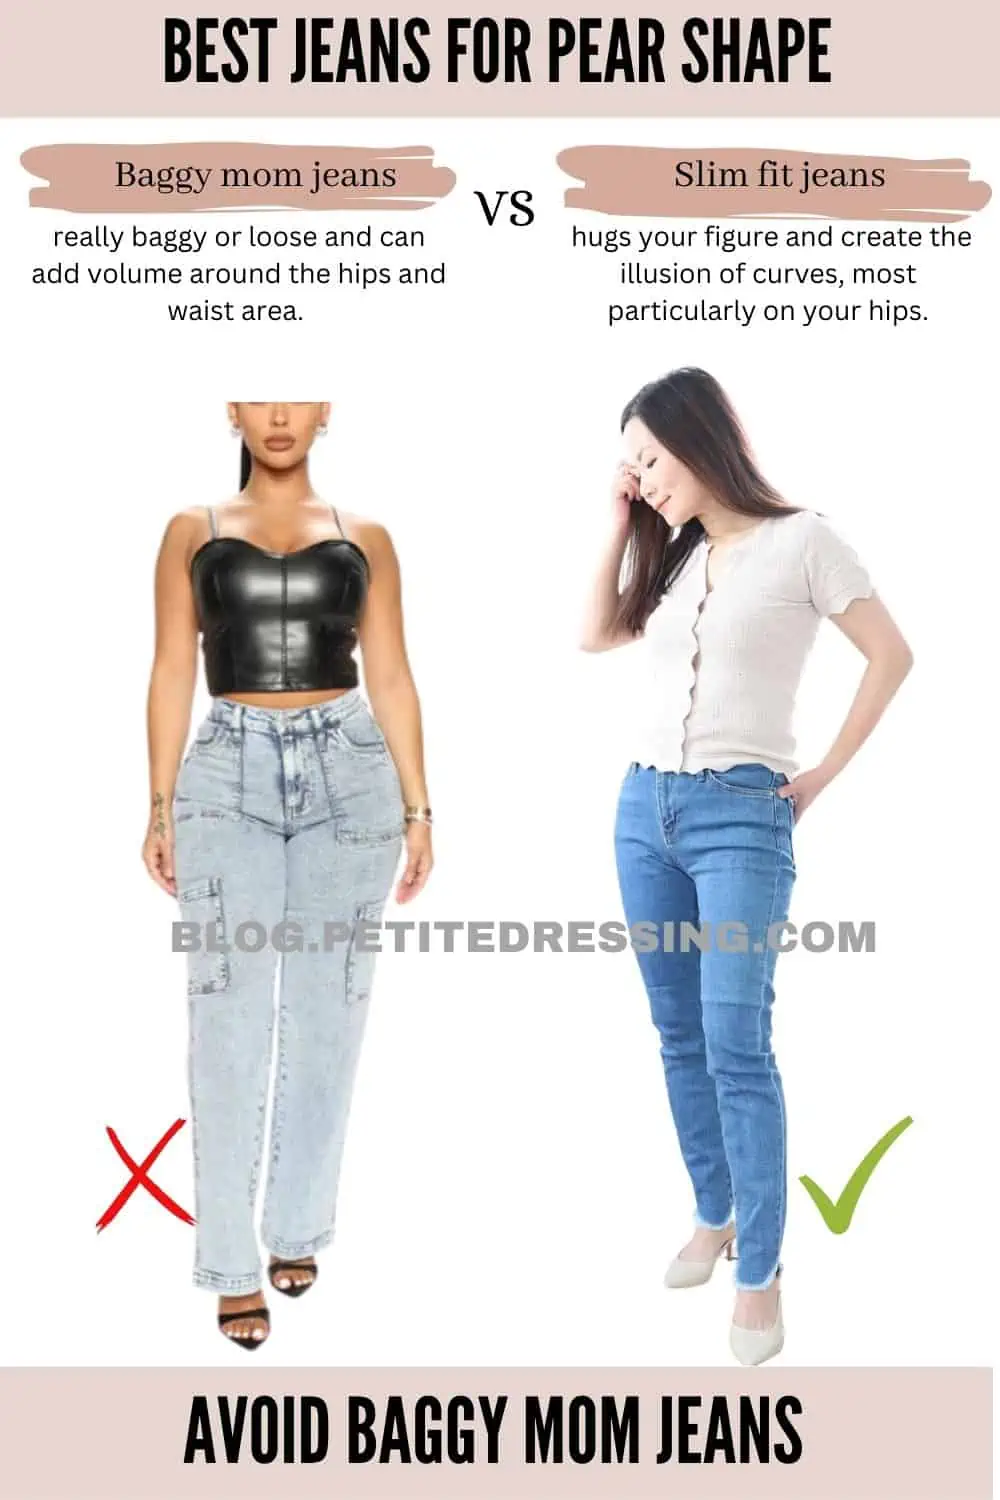 Advice for tops that will flatter my pear shape and balance out these wide  leg jeans? : r/PetiteFashionAdvice